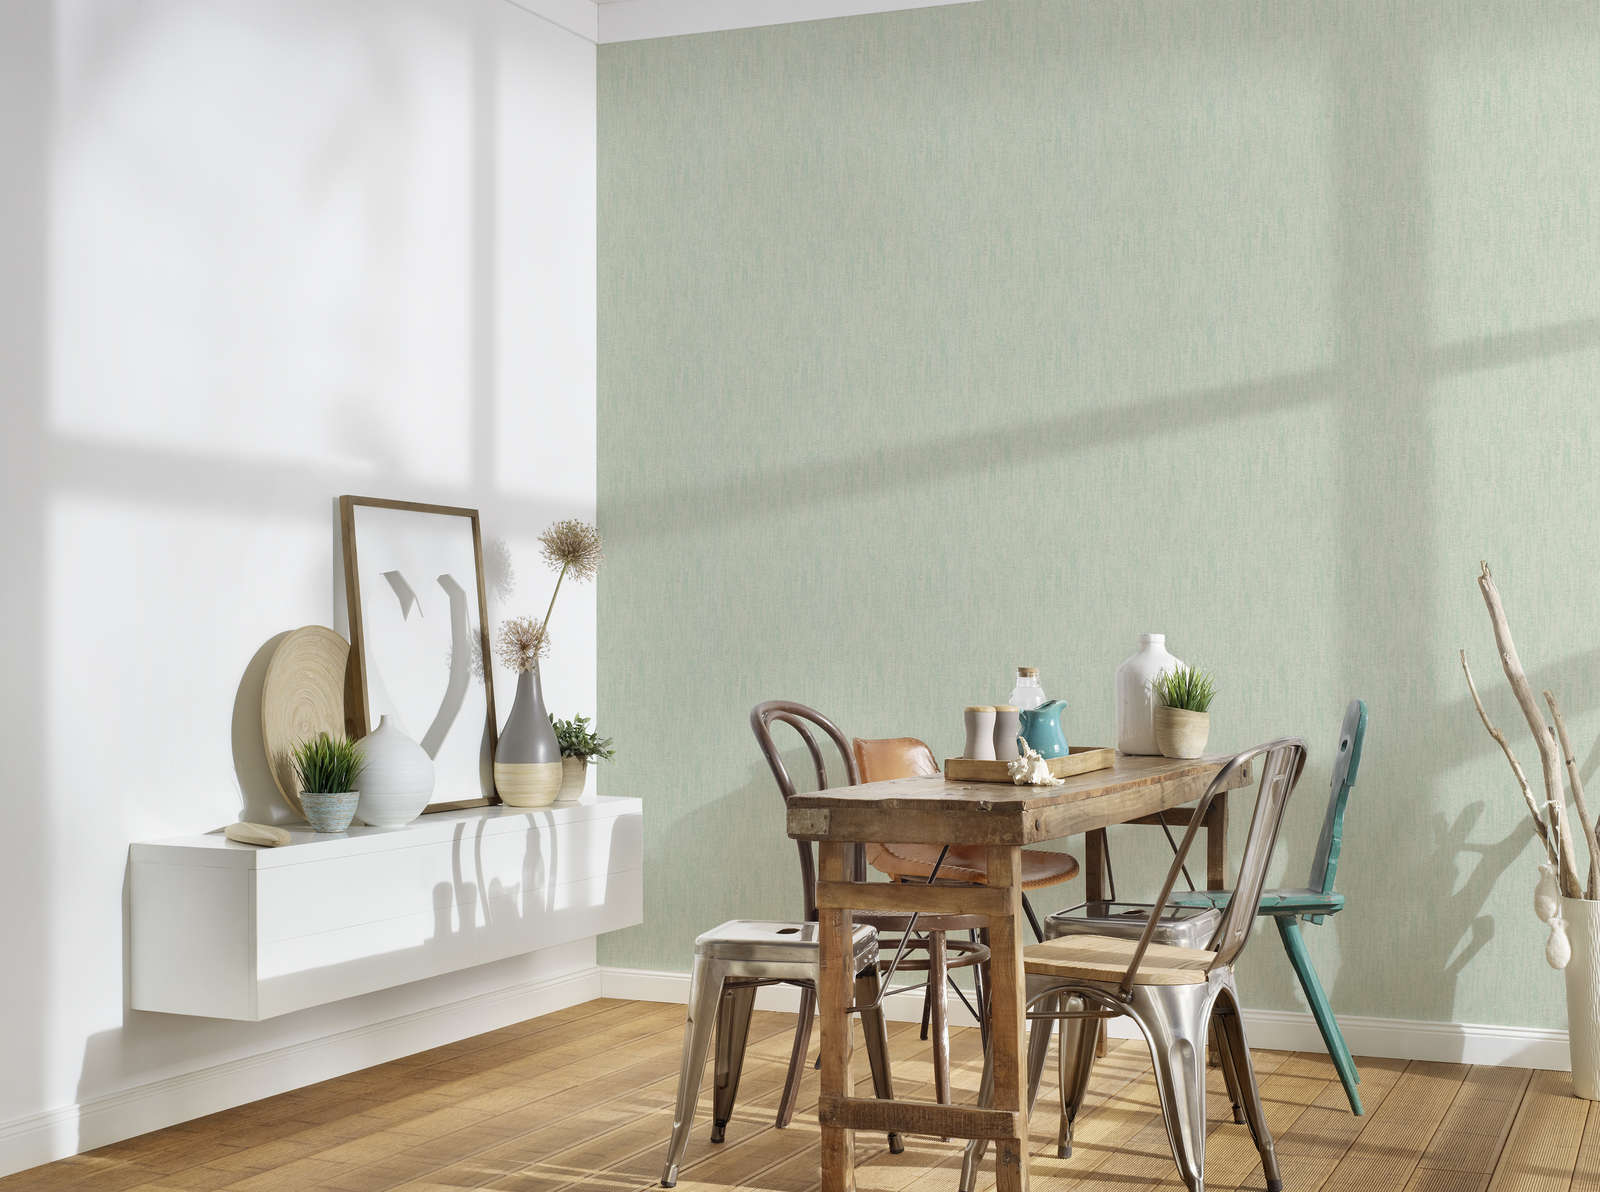             wallpaper mottled with colour hatching & textured pattern - green
        